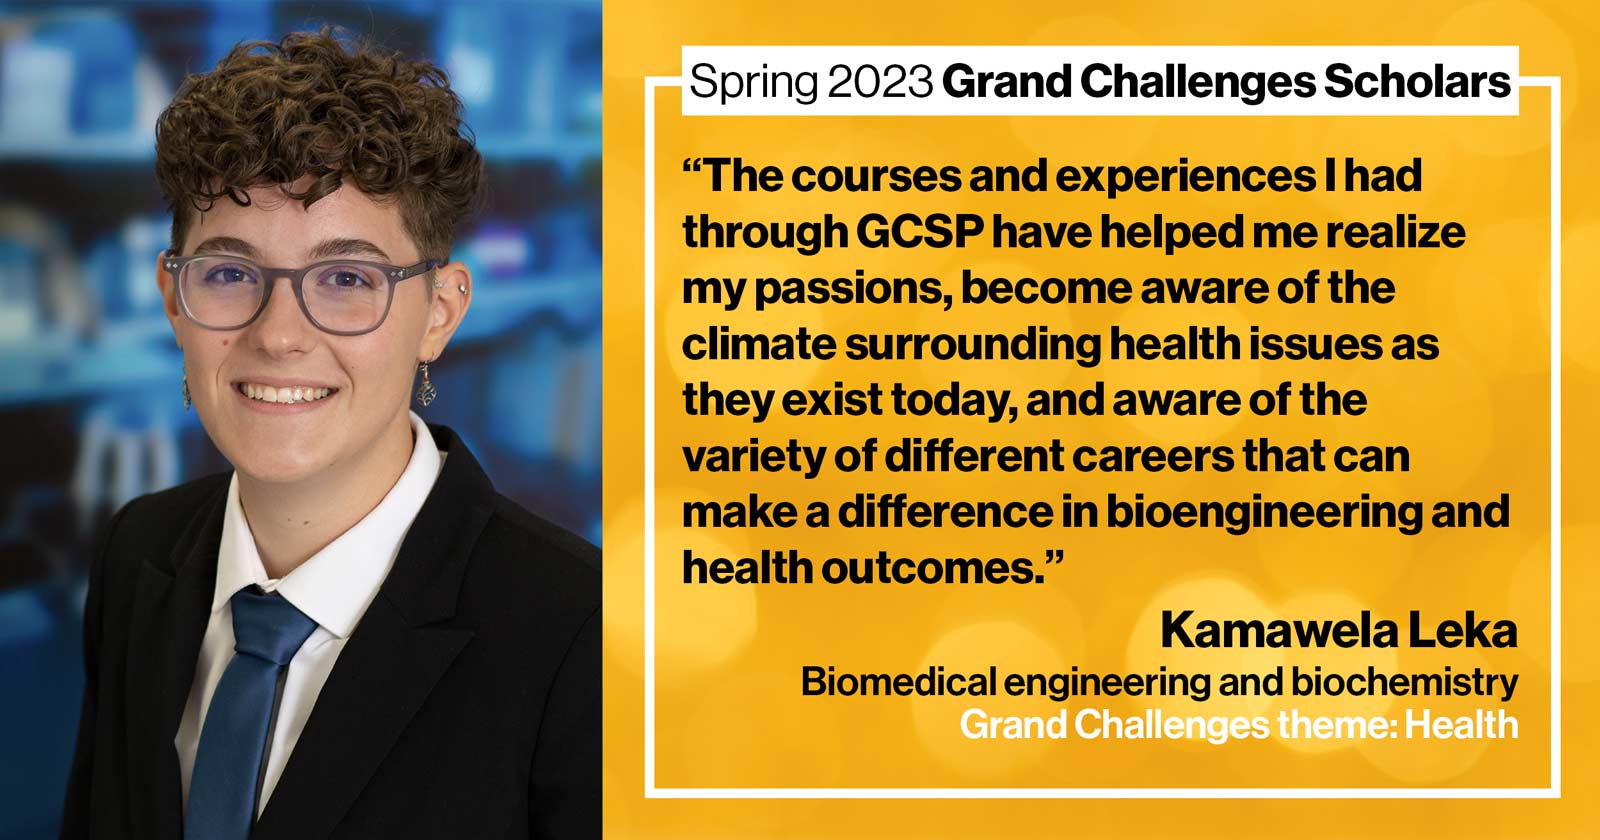 "Kamawela Leka Biomedical engineering and biochemistry Grand Challenge: Health Quote: “The courses and experiences I had through GCSP have helped me realize my passions, become aware of the climate surrounding health issues as they exist today, and aware of the variety of different careers that can make a difference in bioengineering and health outcomes.”"